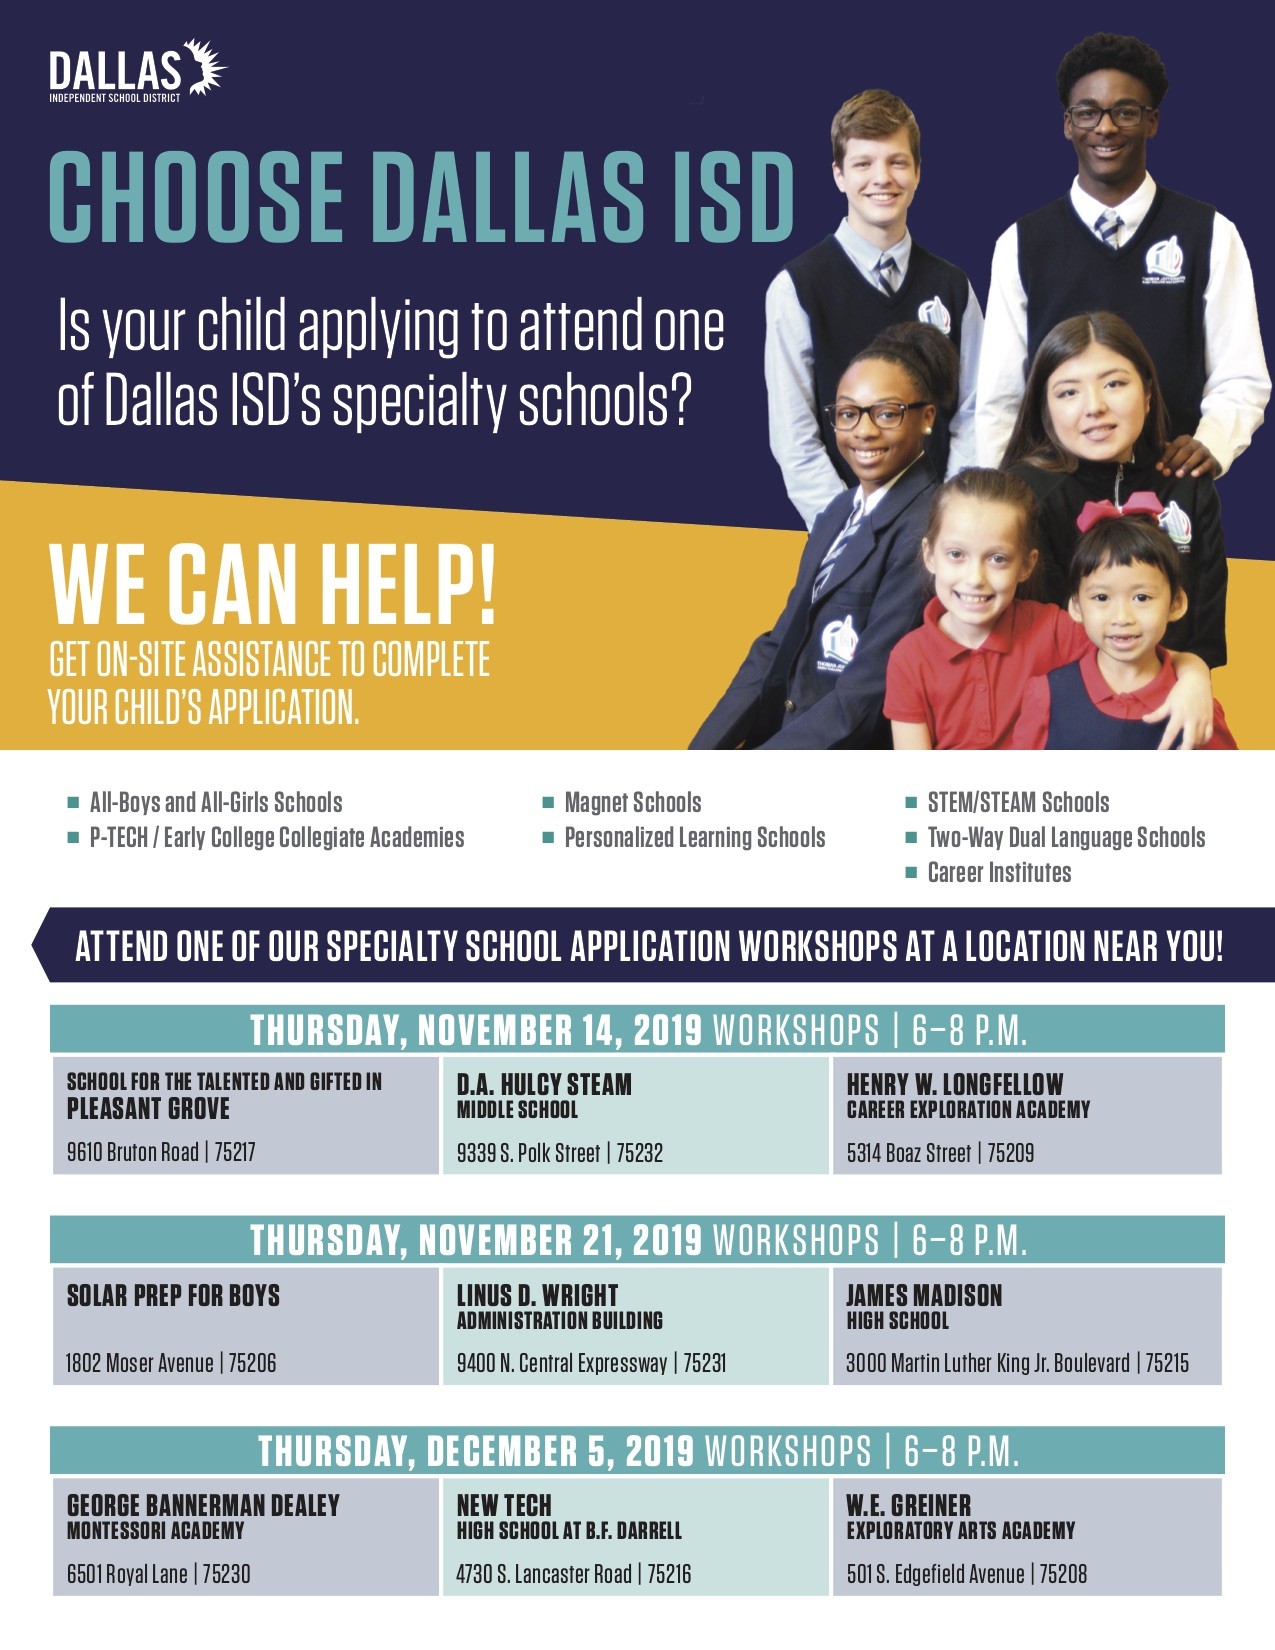 Is your child applying to a Dallas ISD specialty schools? Let us help!